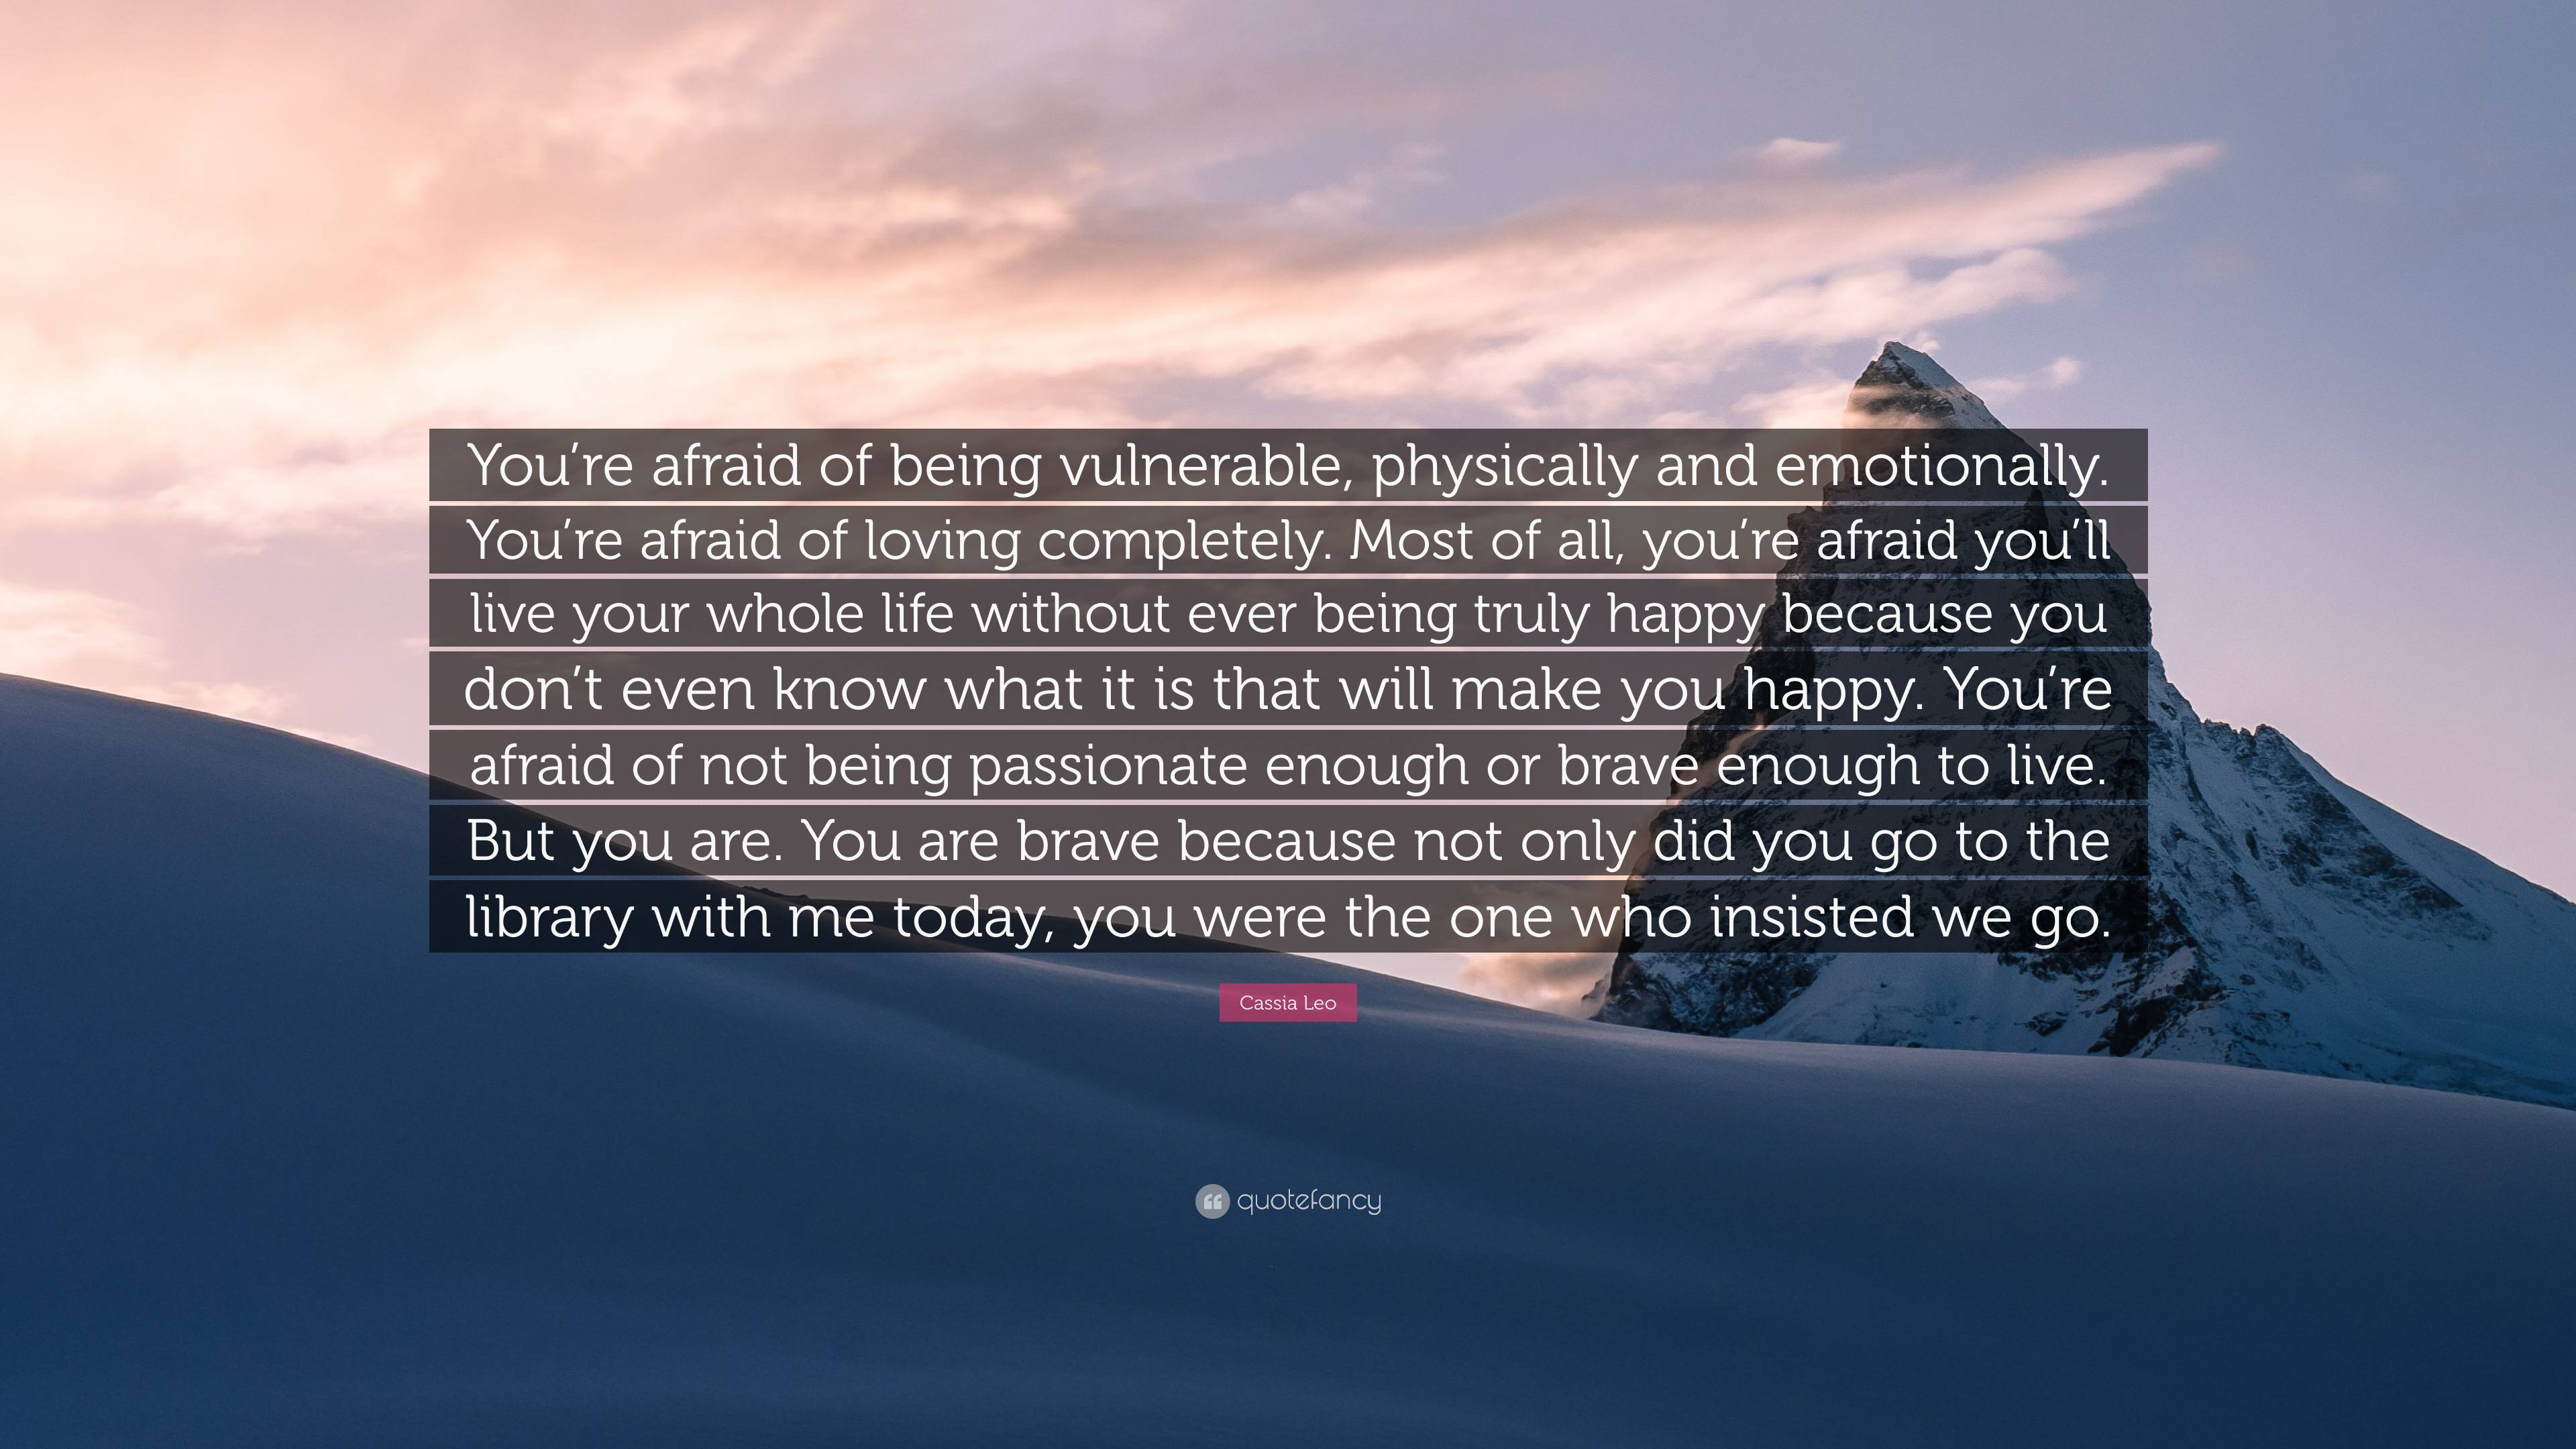 Cassia Leo Quote: “You’re afraid of being vulnerable, physically and ...